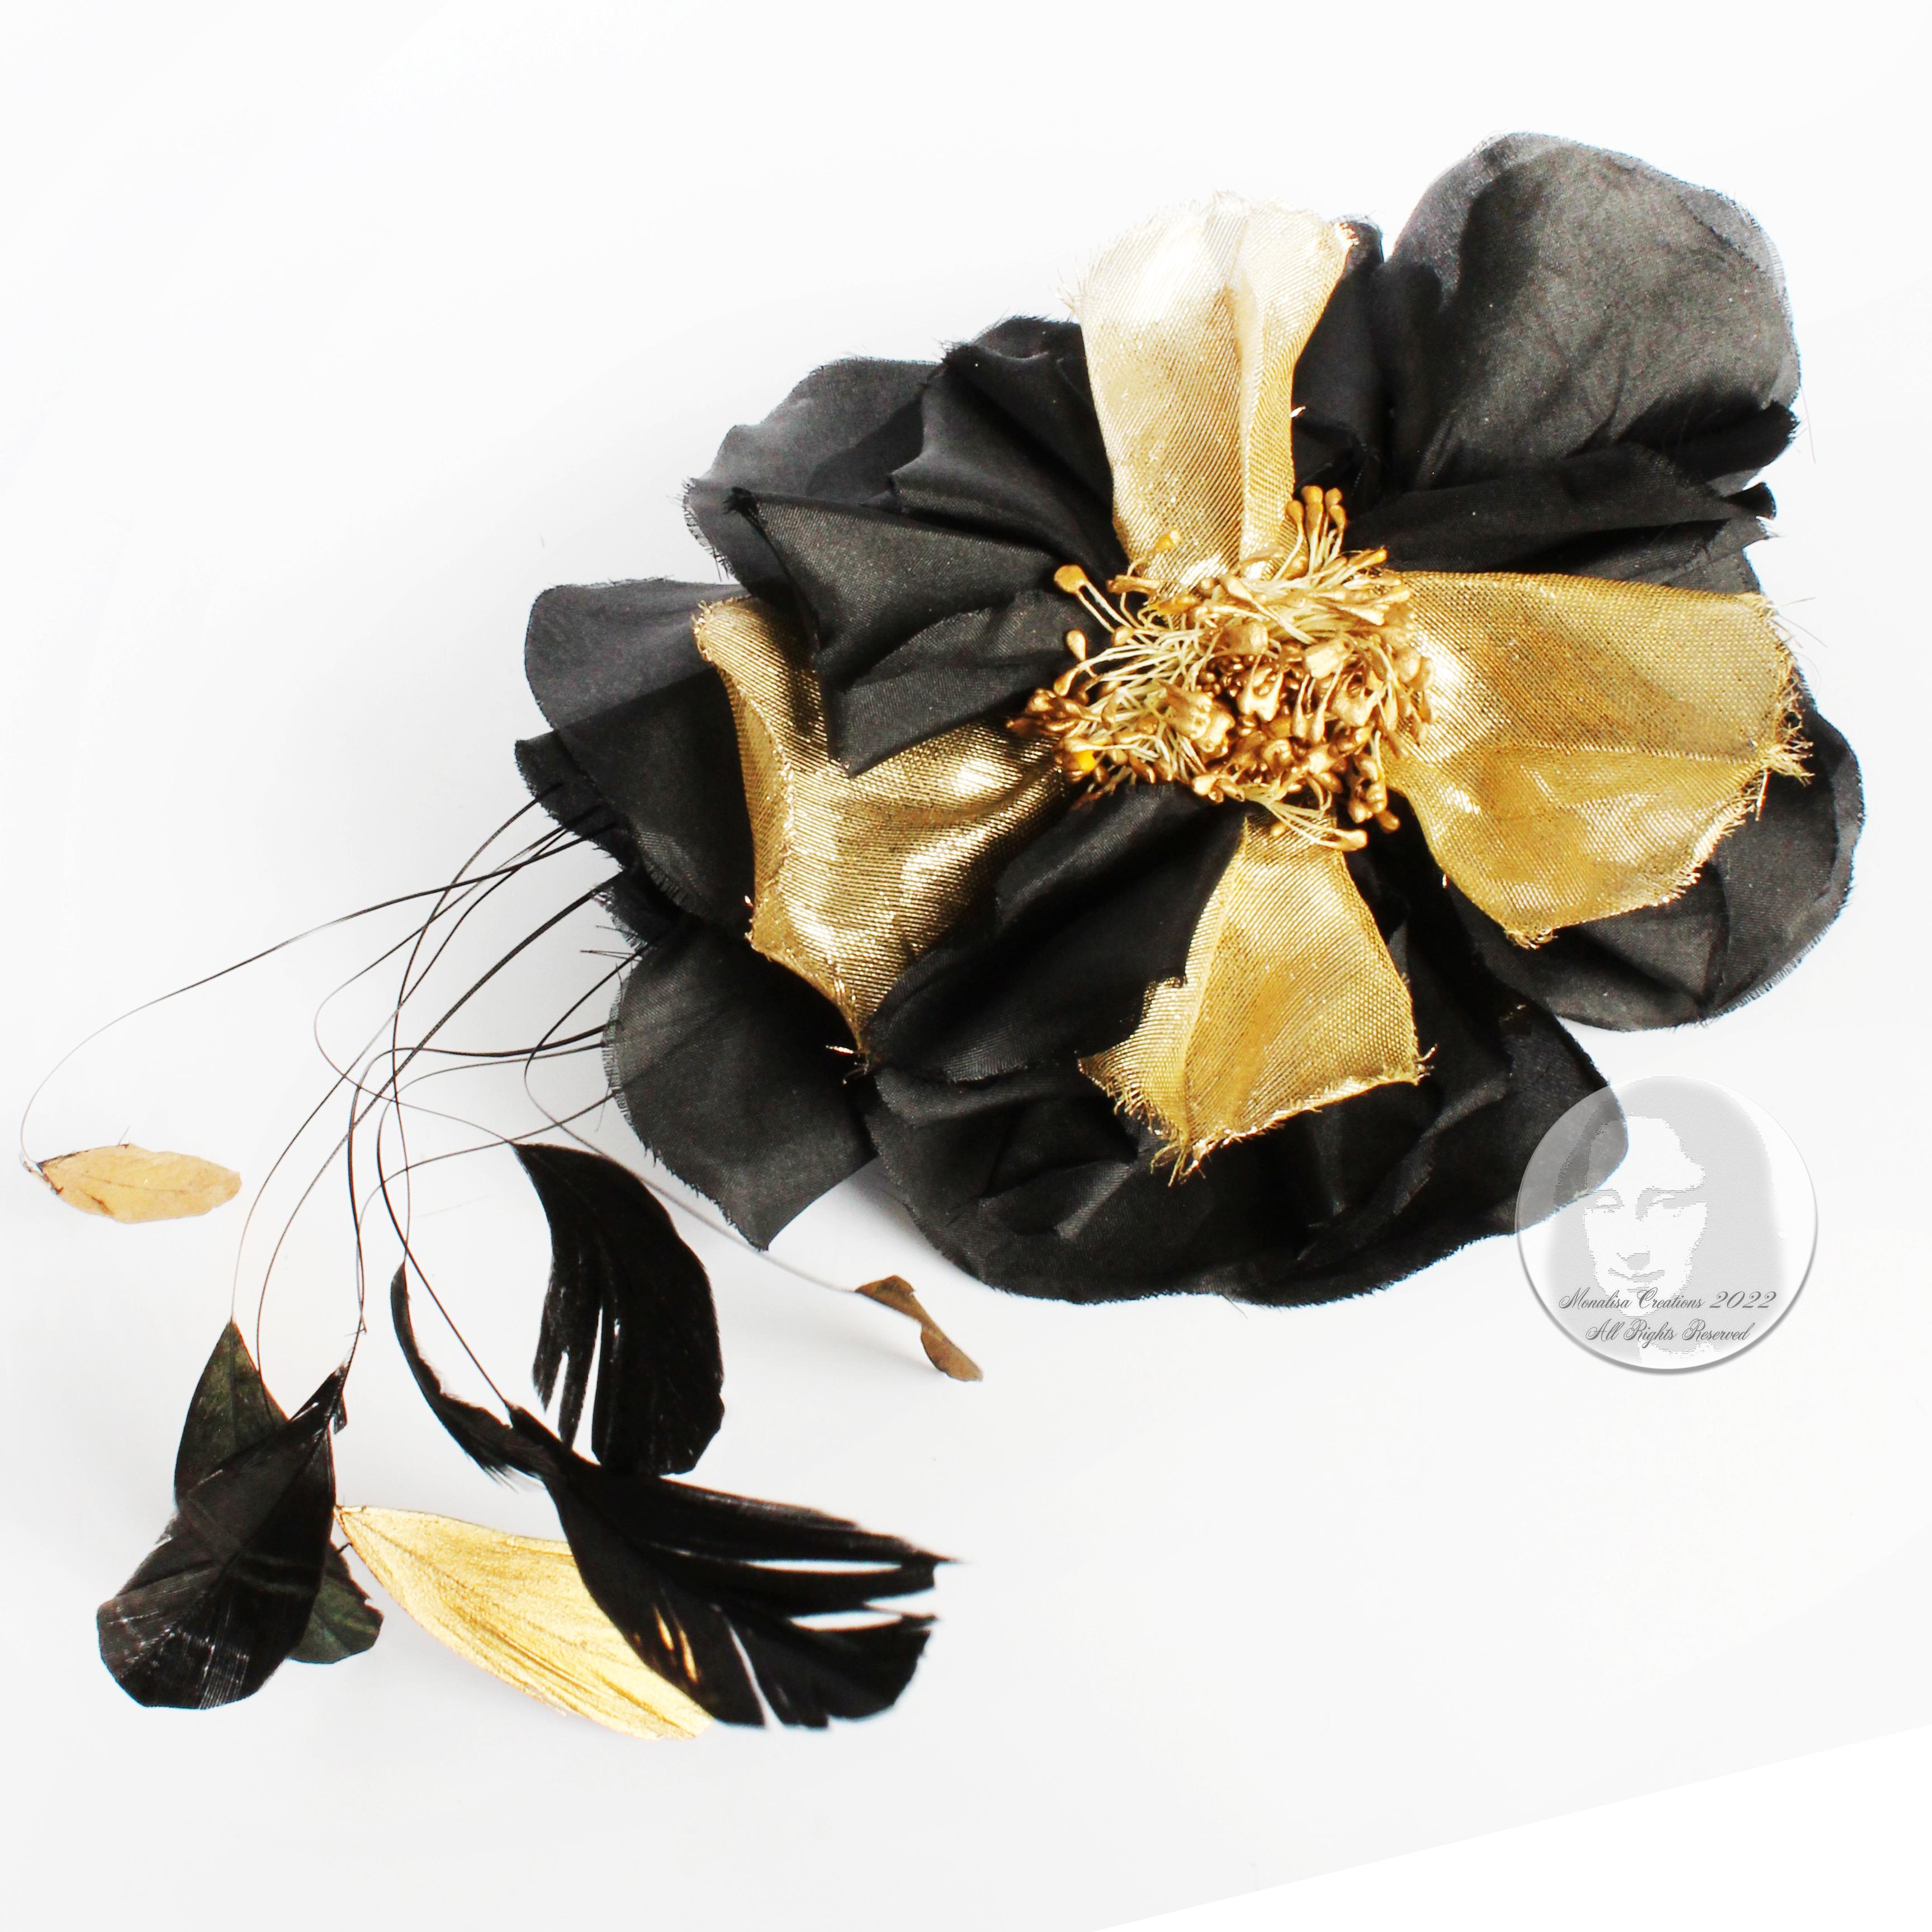 Yves Saint Laurent Decorative Head Piece Hair Comb Flower and Feathers Rare 70s In Good Condition For Sale In Port Saint Lucie, FL